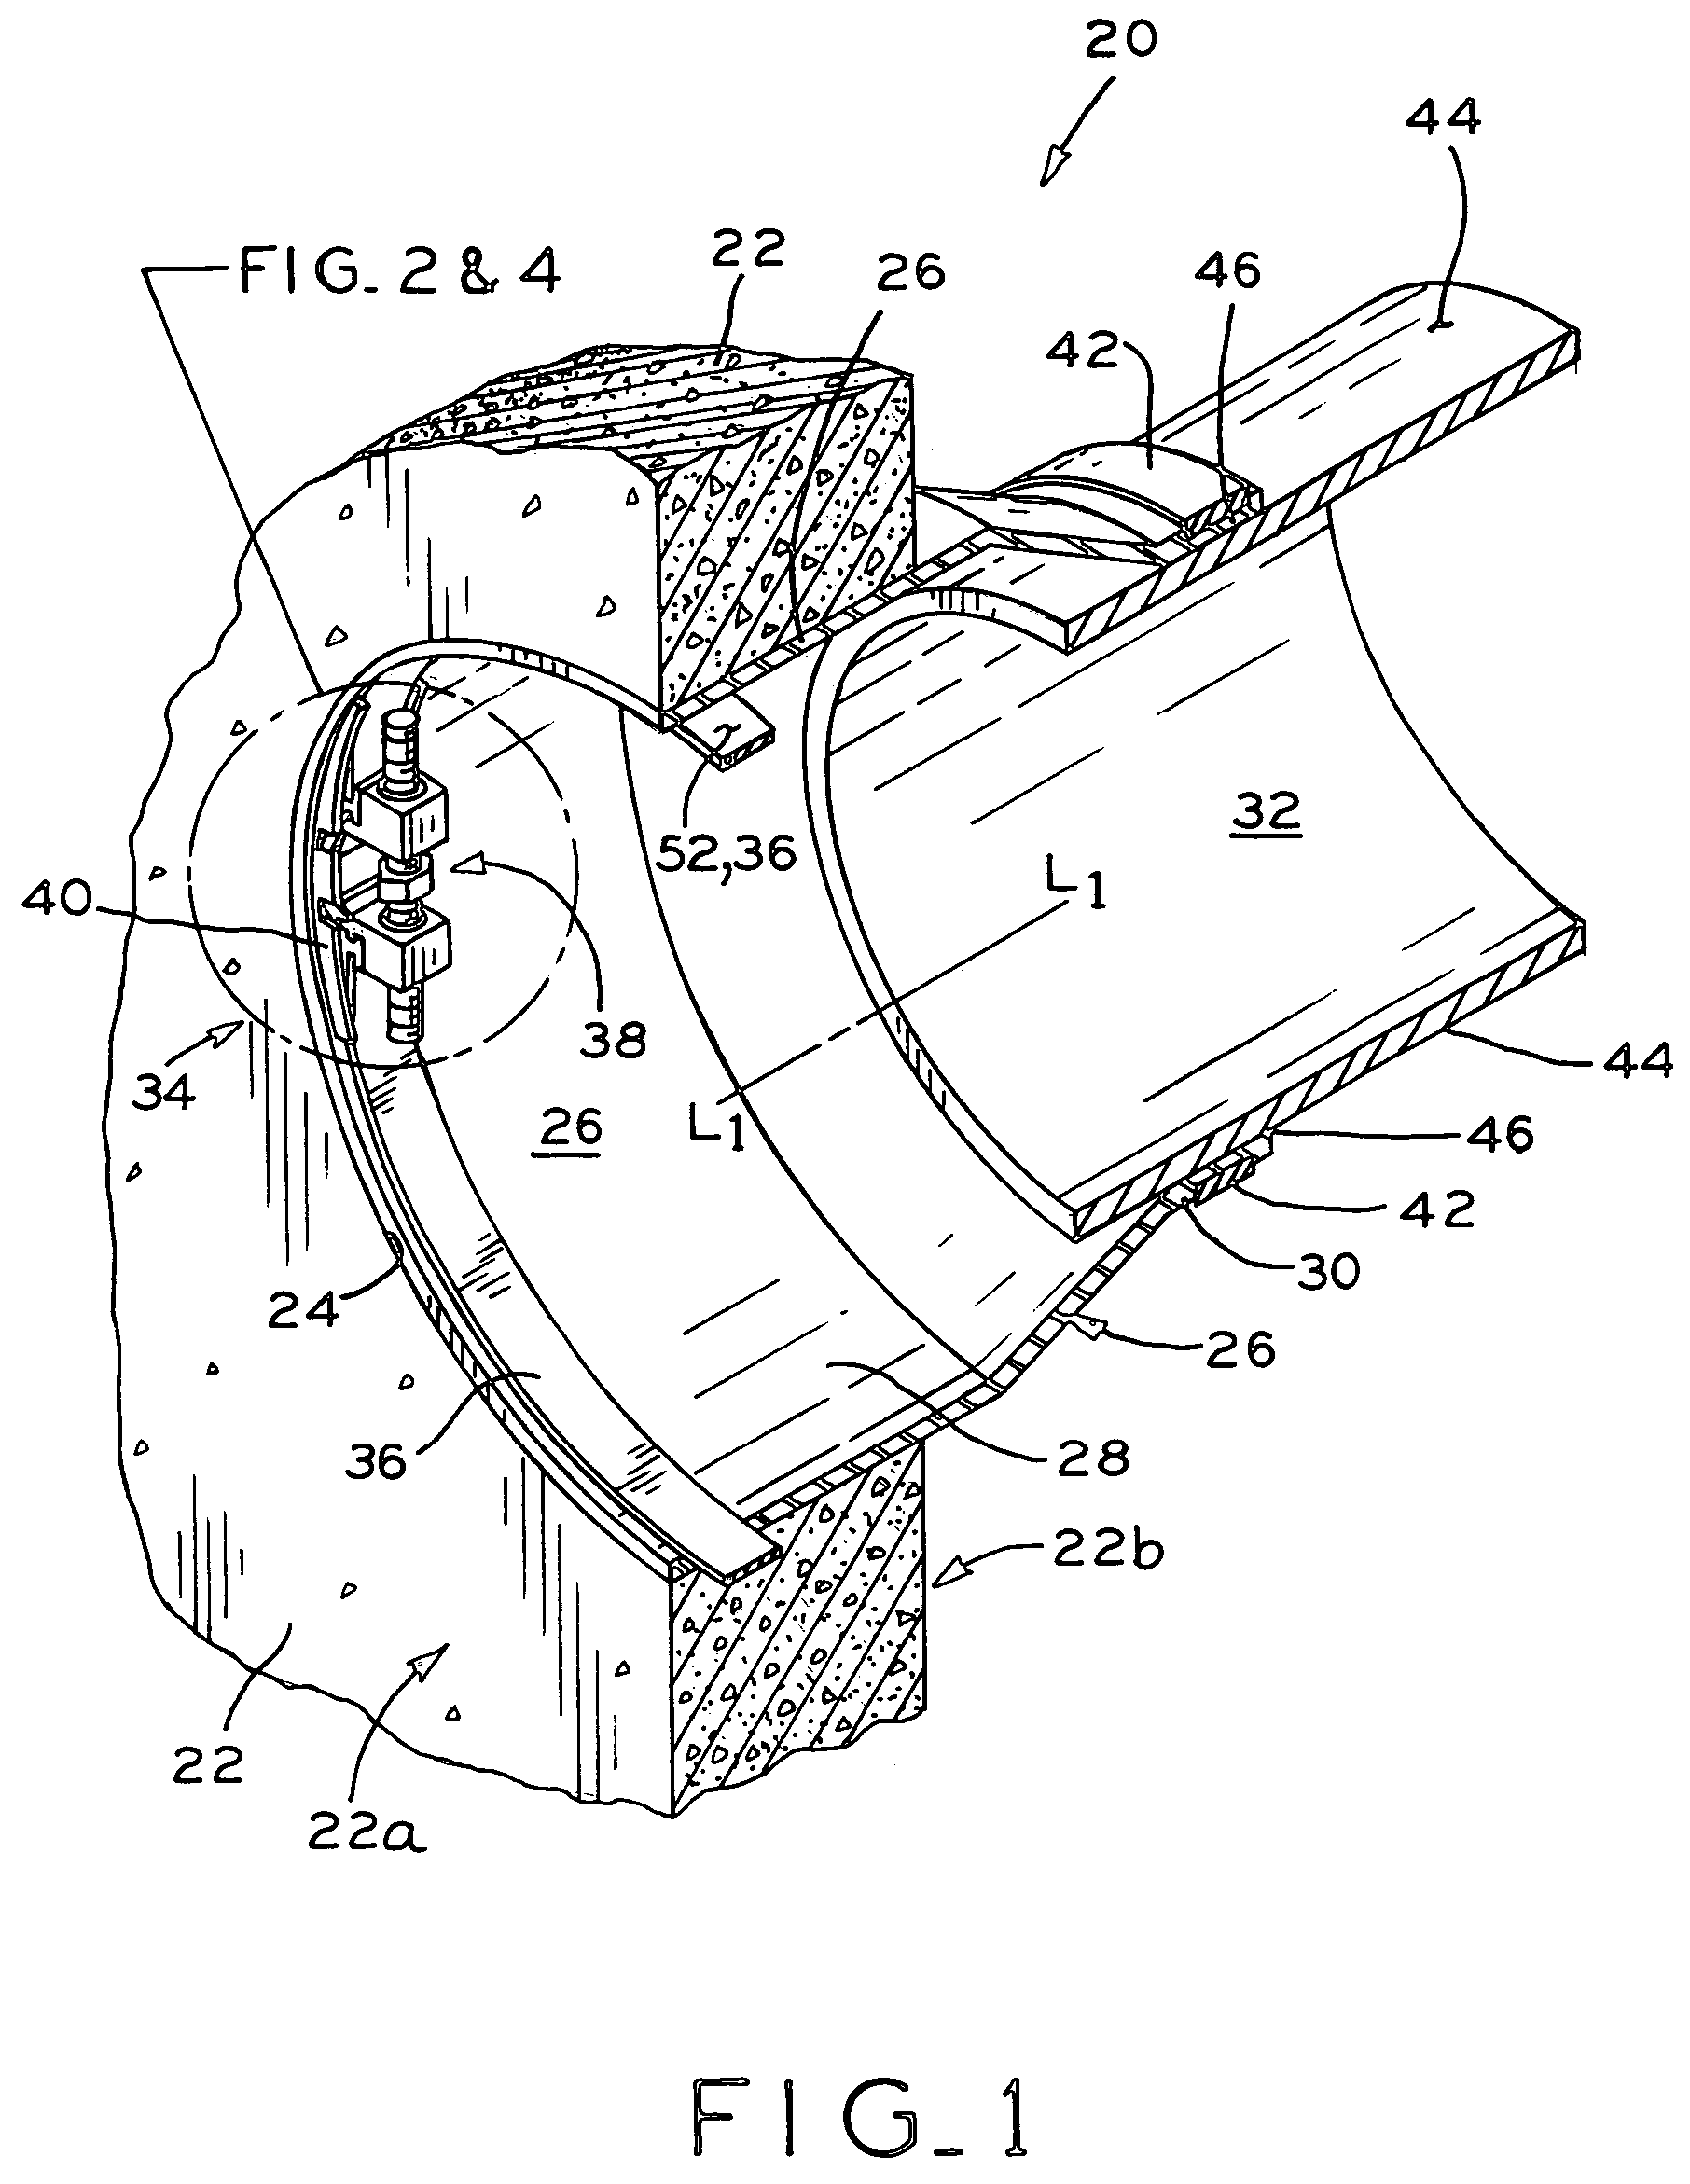 Expansion ring assembly with removable drive mechanism